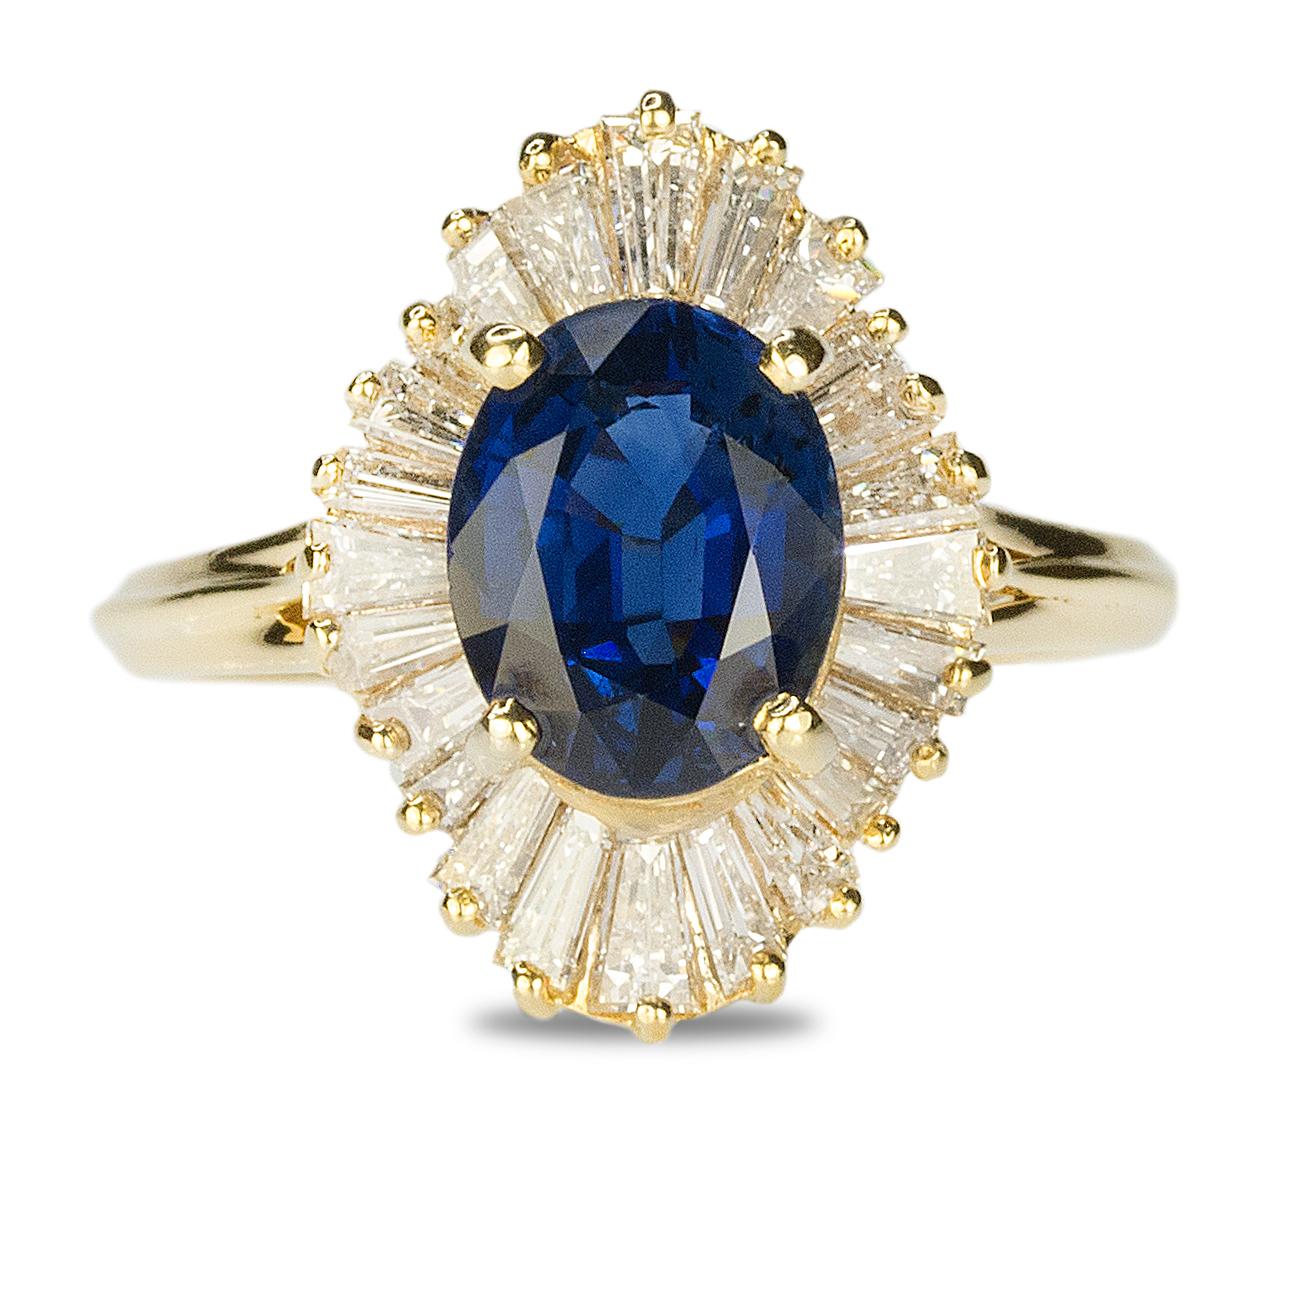 Yellow Gold Ring with approximate 2.70 carat royal blue sapphire and 28 baguette diamonds weighing approximately 1.50 carats. 4.81g